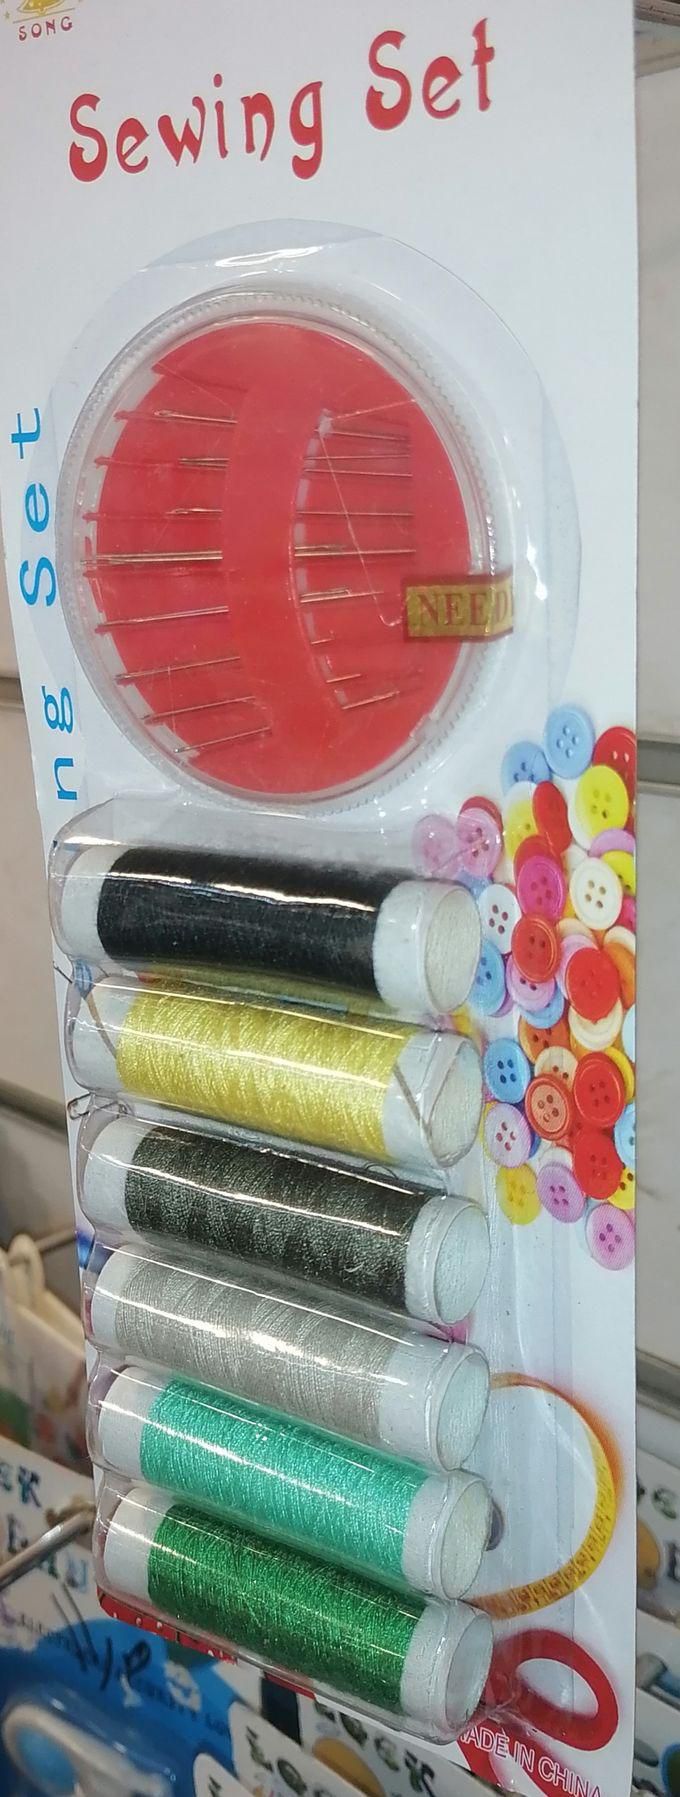 Multi-colored Thread Bobbins + Sewing Needles Of Different Sizes. Sewing Supplies